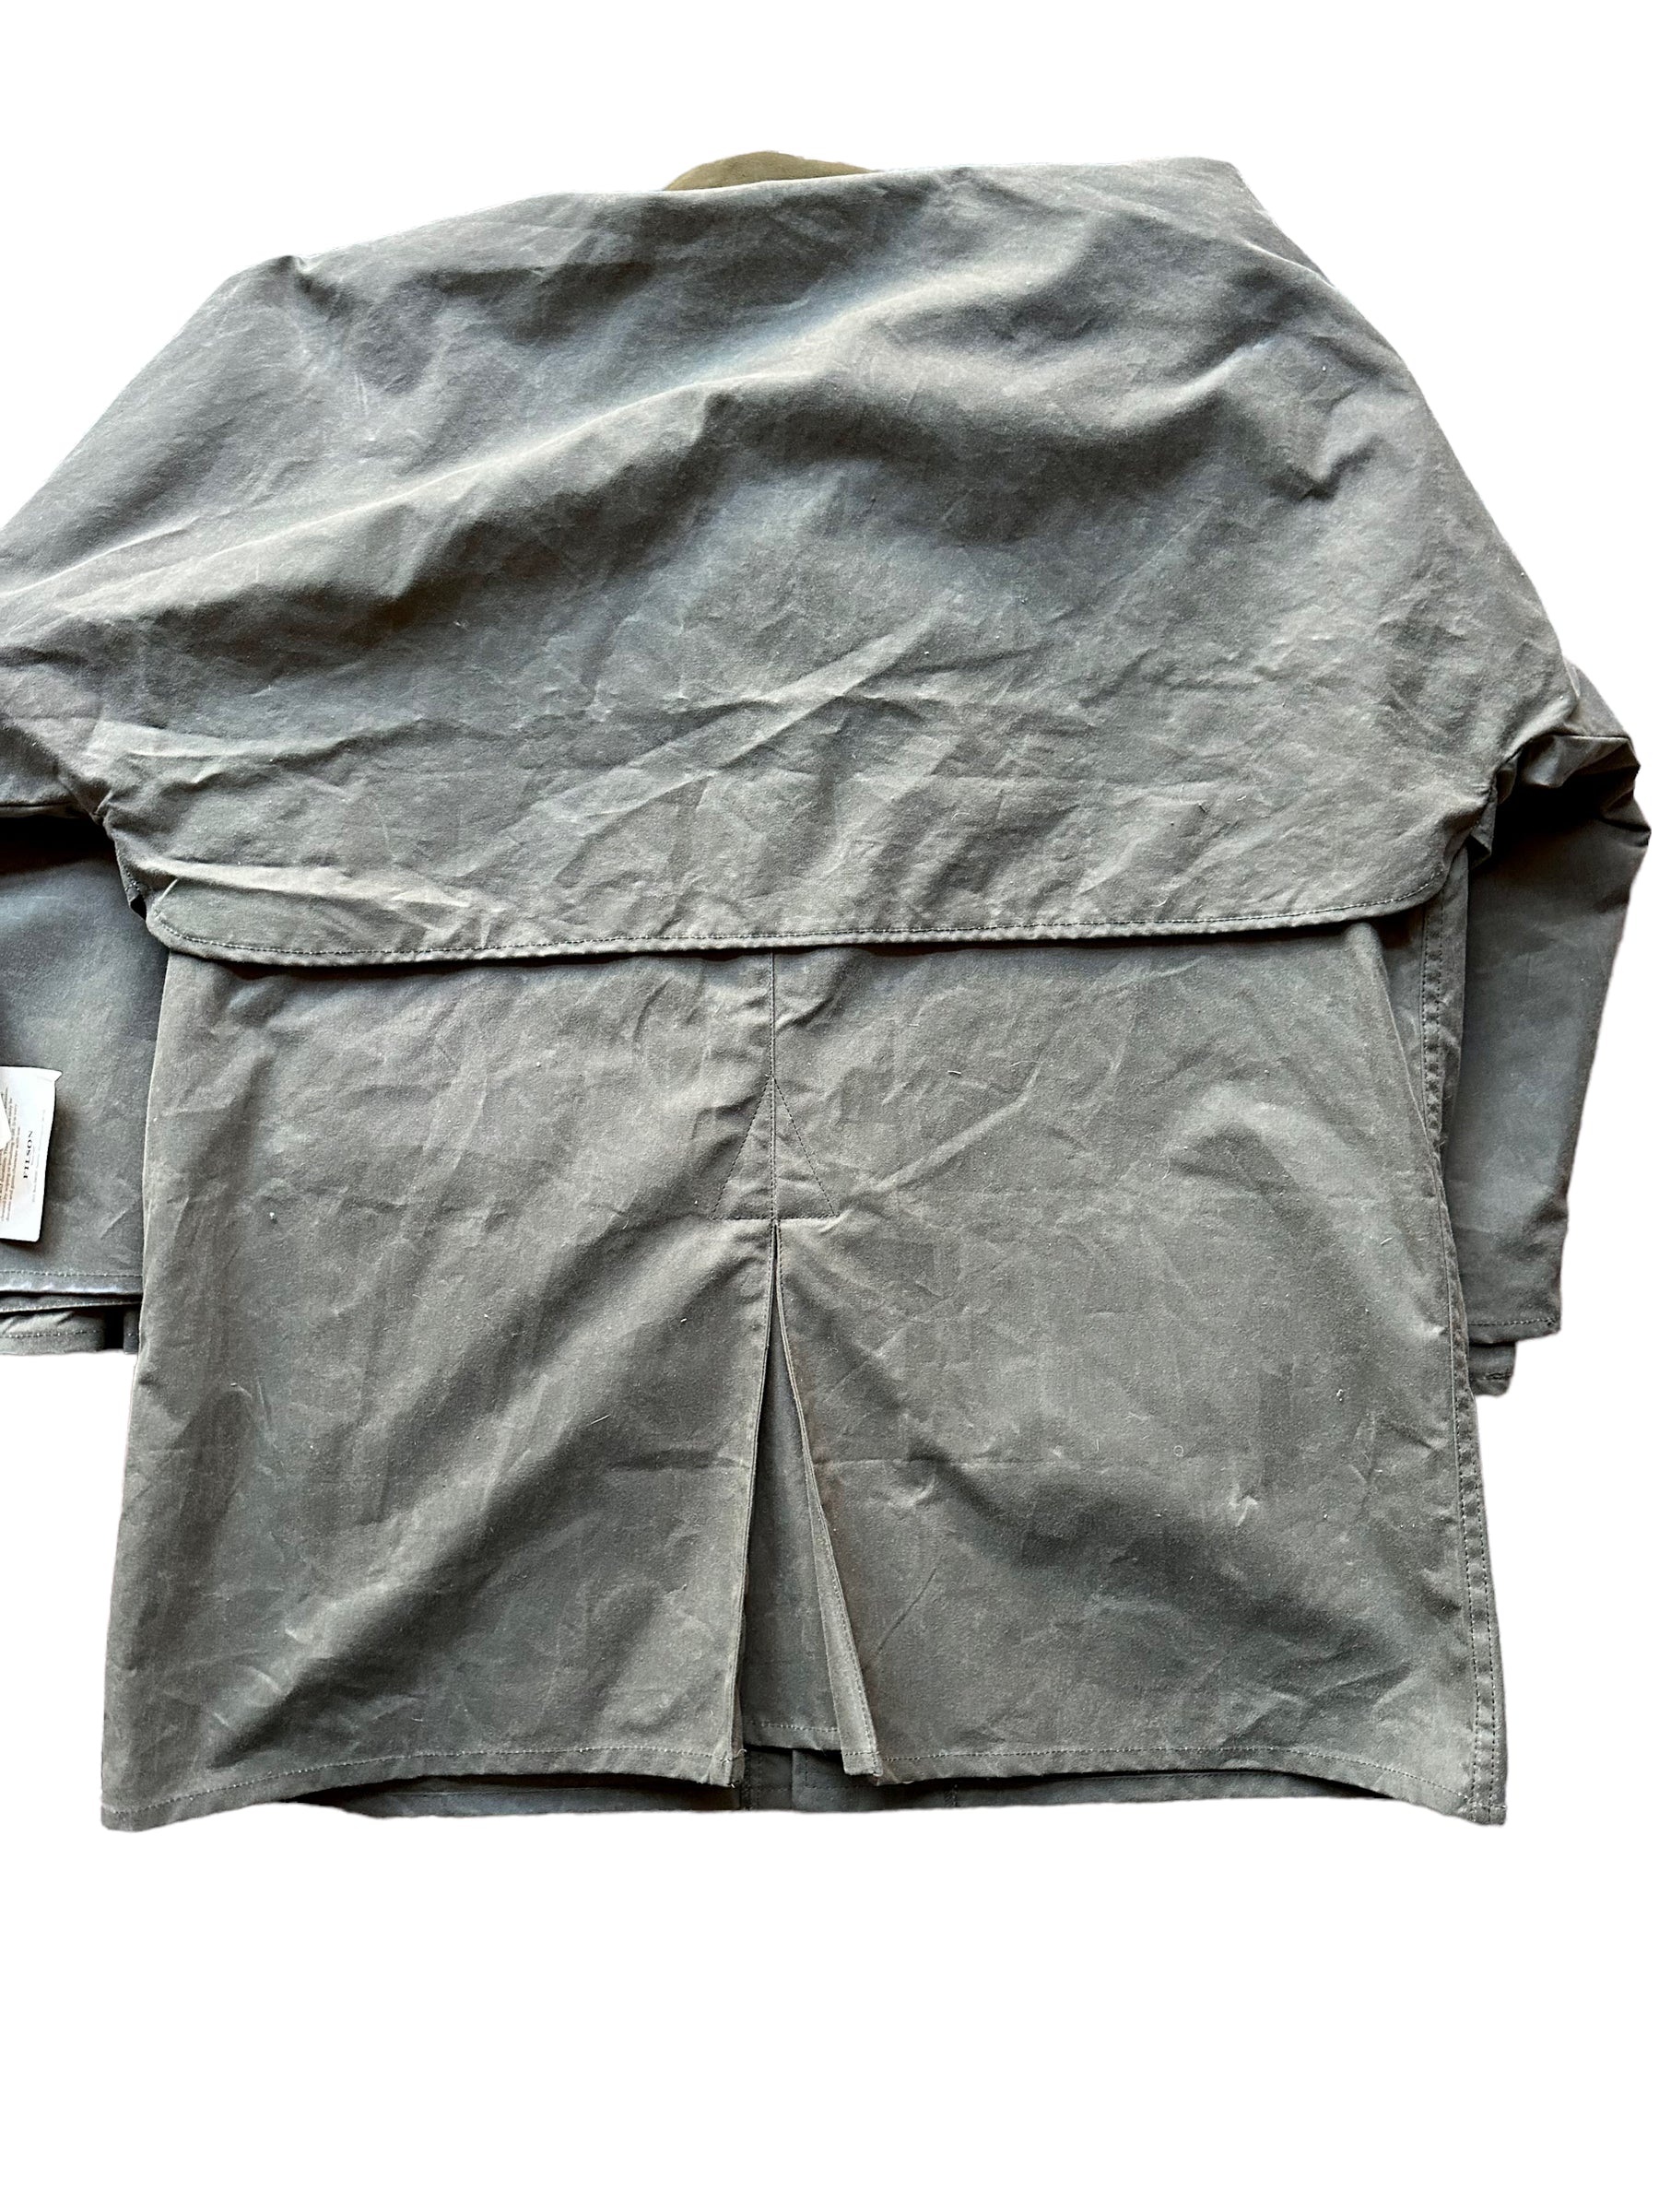 Rear Right View of NWT Vintage Filson Shelter Cloth Packer Coat SZ 46 |  Barn Owl Vintage Goods Filson | Vintage Filson Tin Cloth Workwear Seattle